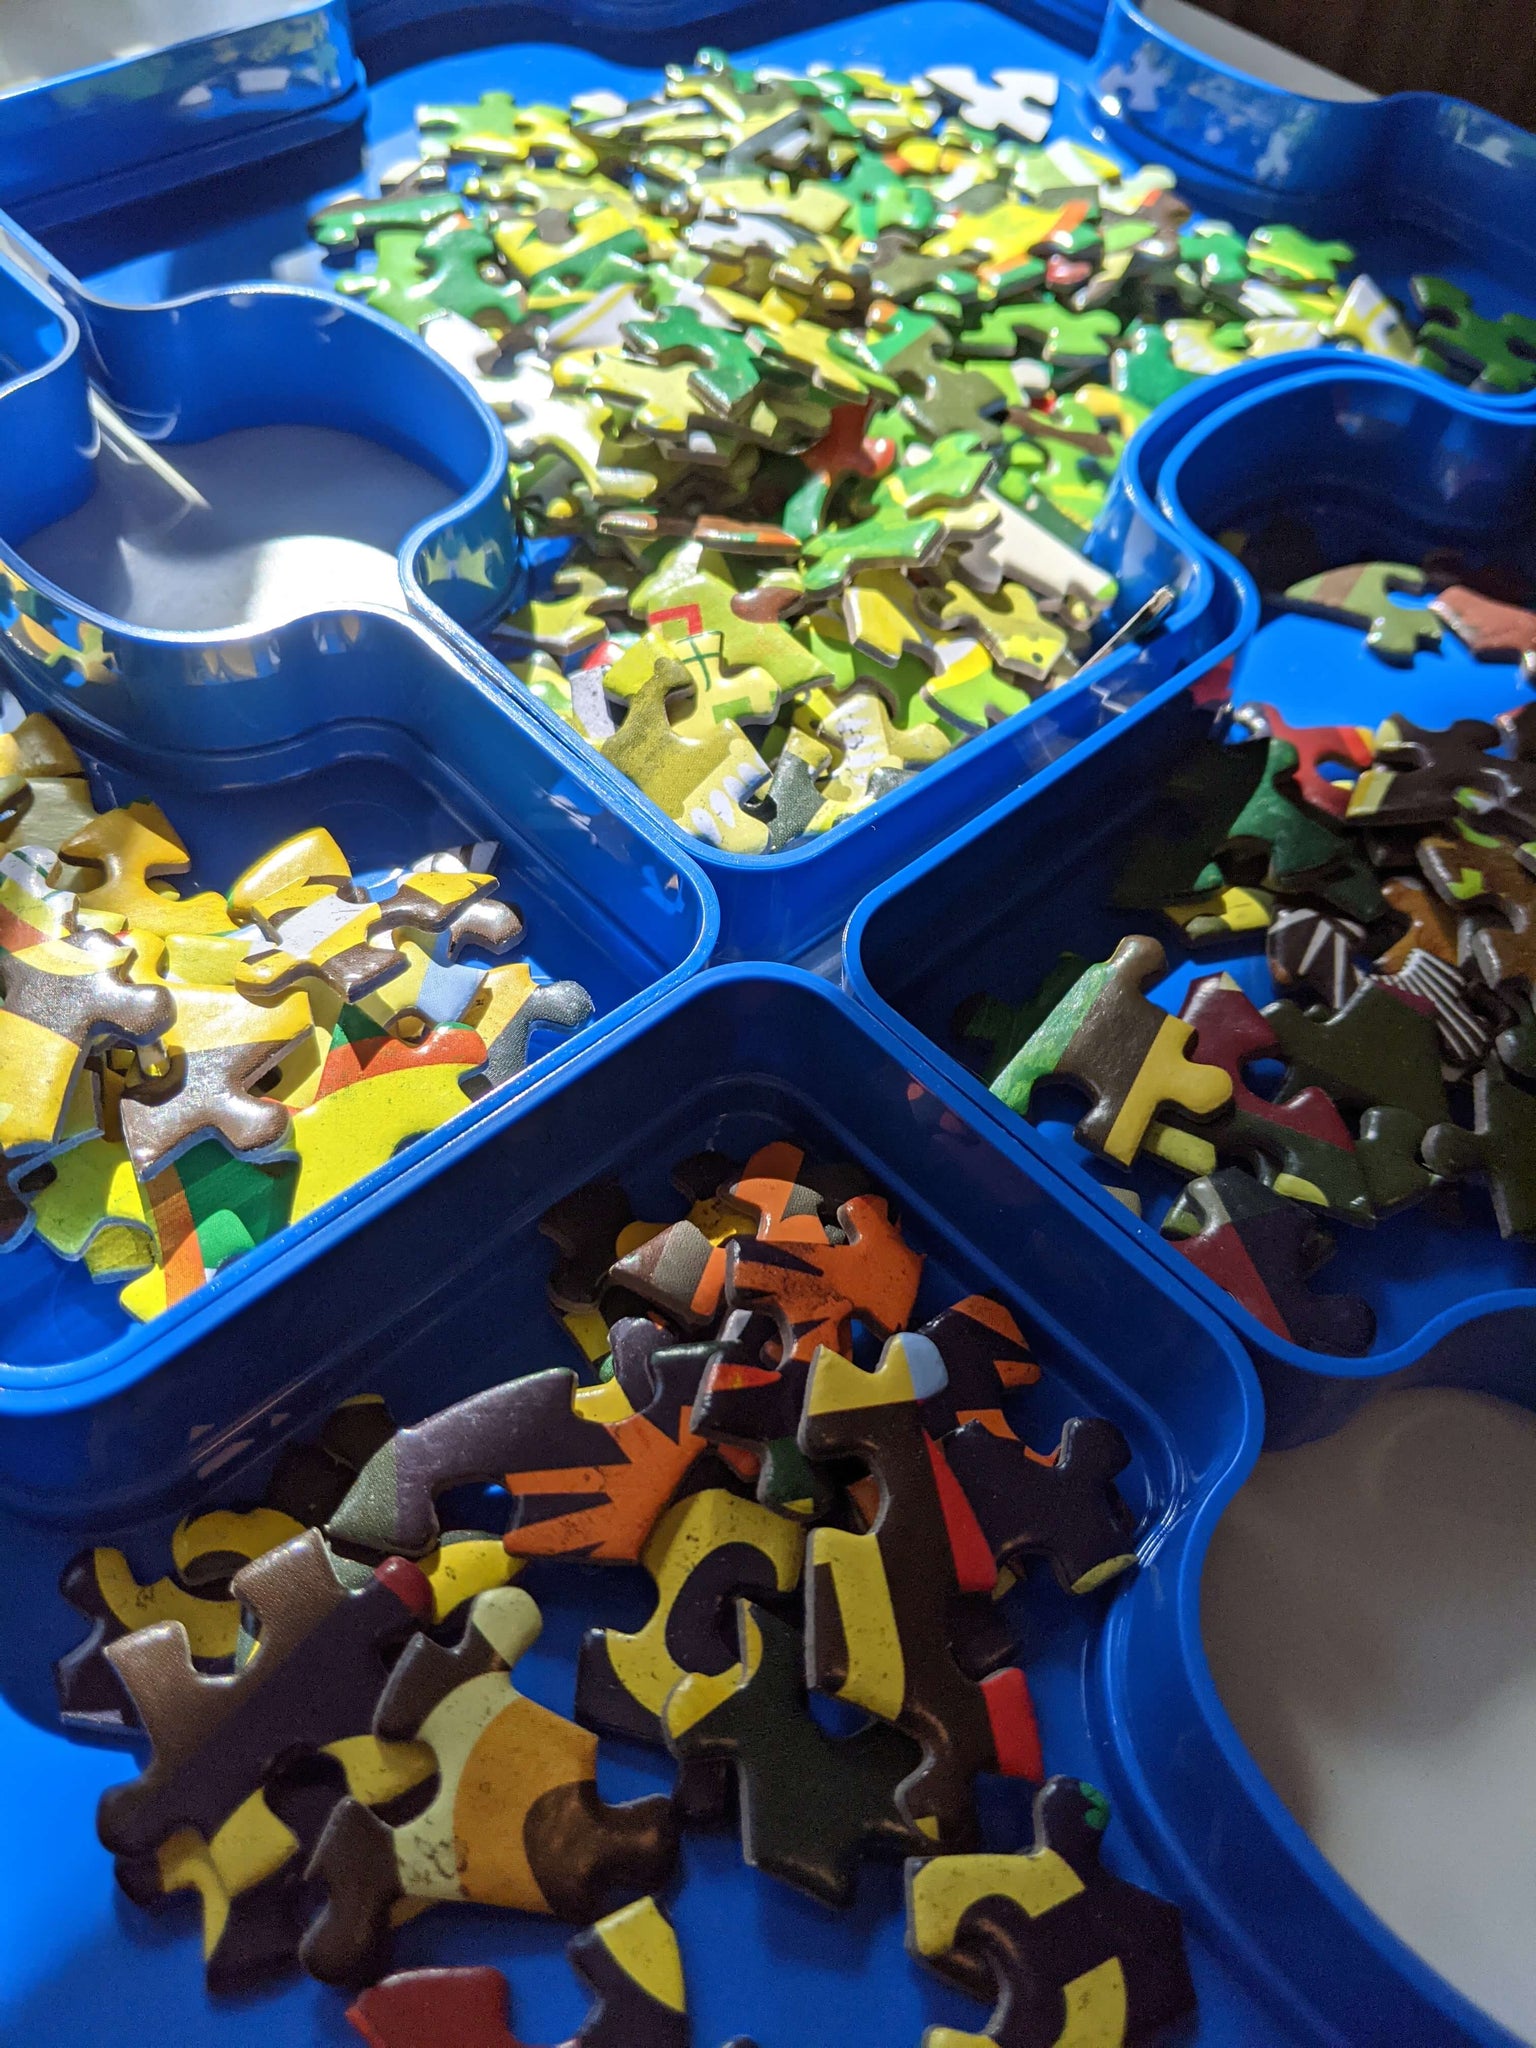 The Puzzle Sorter – Completing the Puzzle